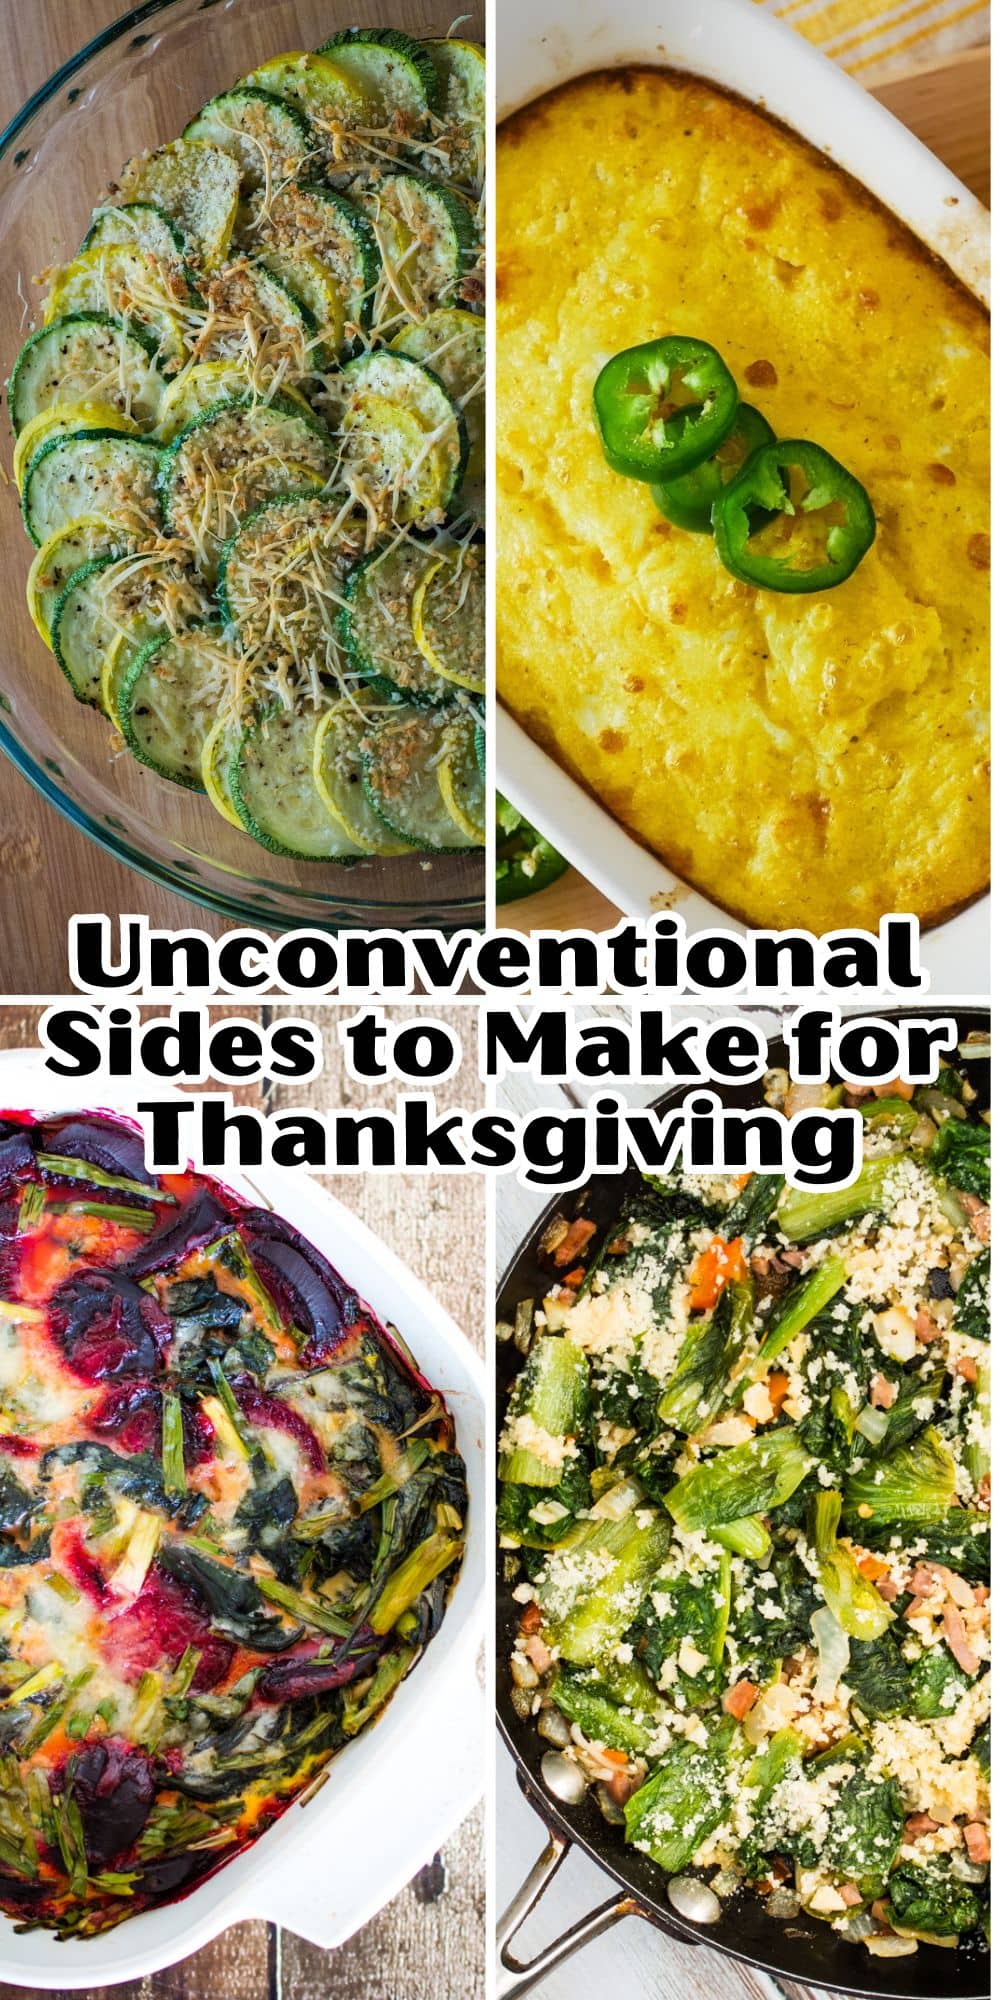 Unconventional sides to make for thanksgiving.